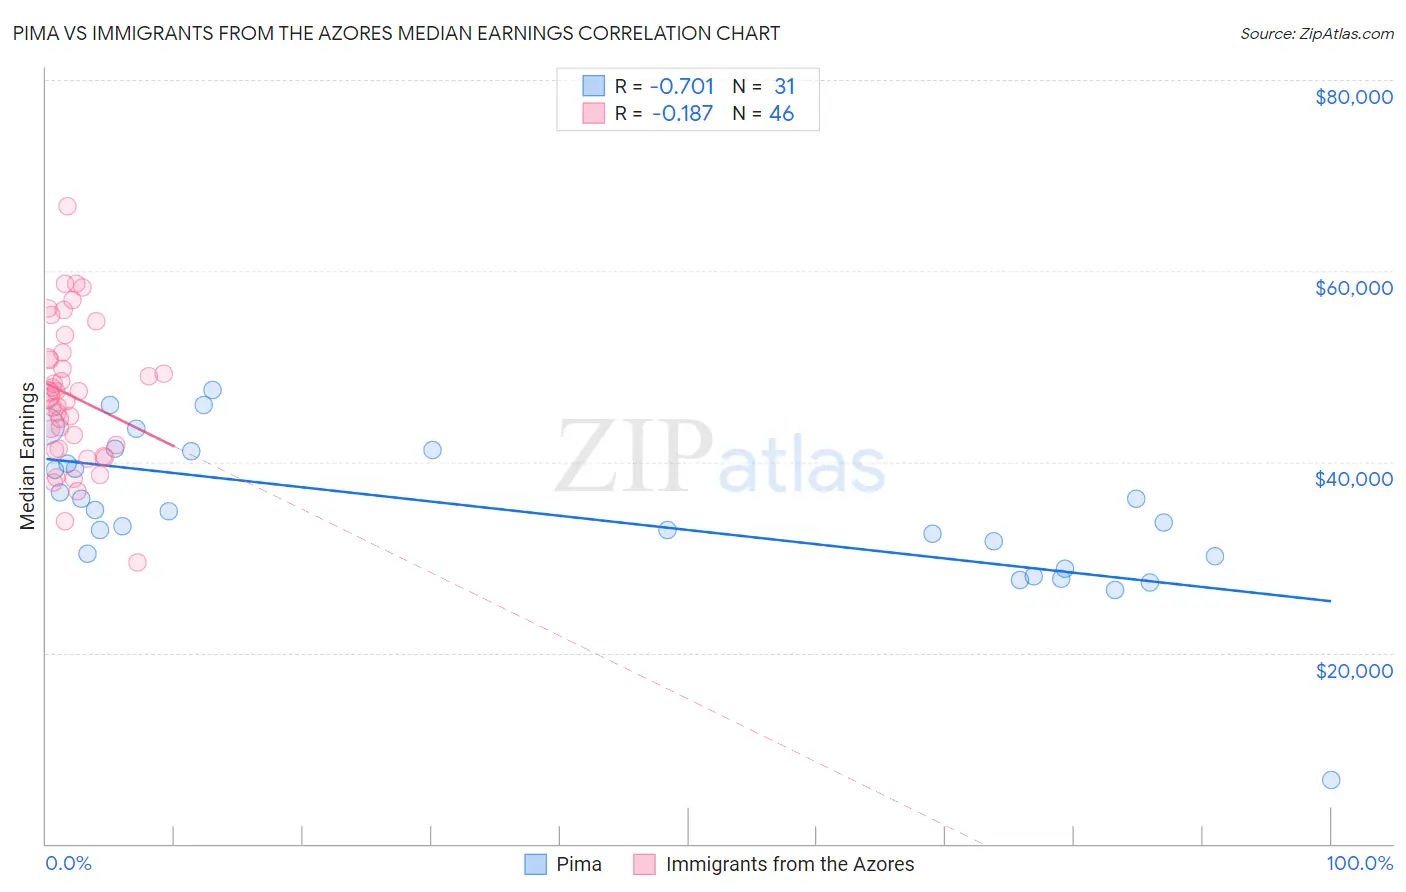 Pima vs Immigrants from the Azores Median Earnings